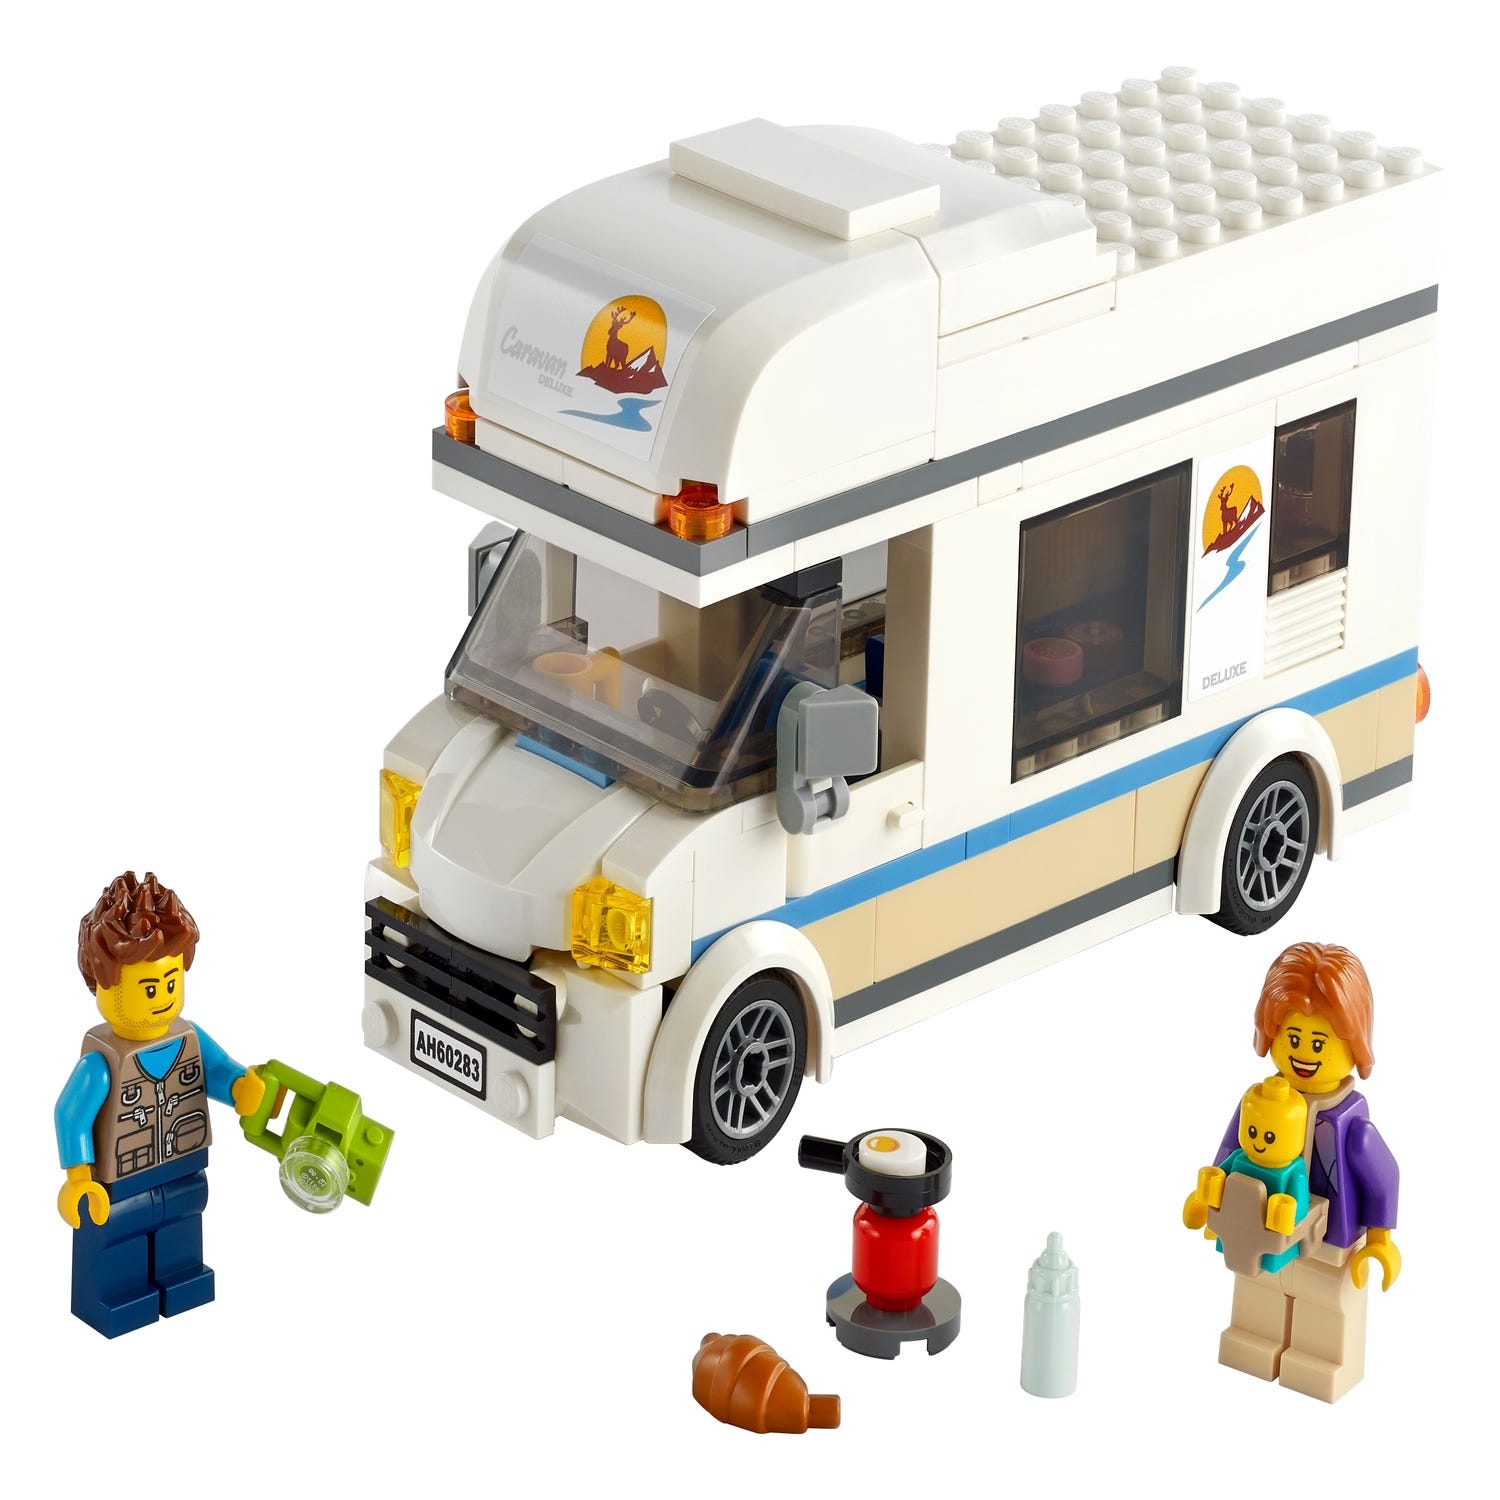 Intrusion frakobling Perioperativ periode Holiday Camper Van 60283 | City | Buy online at the Official LEGO® Shop US